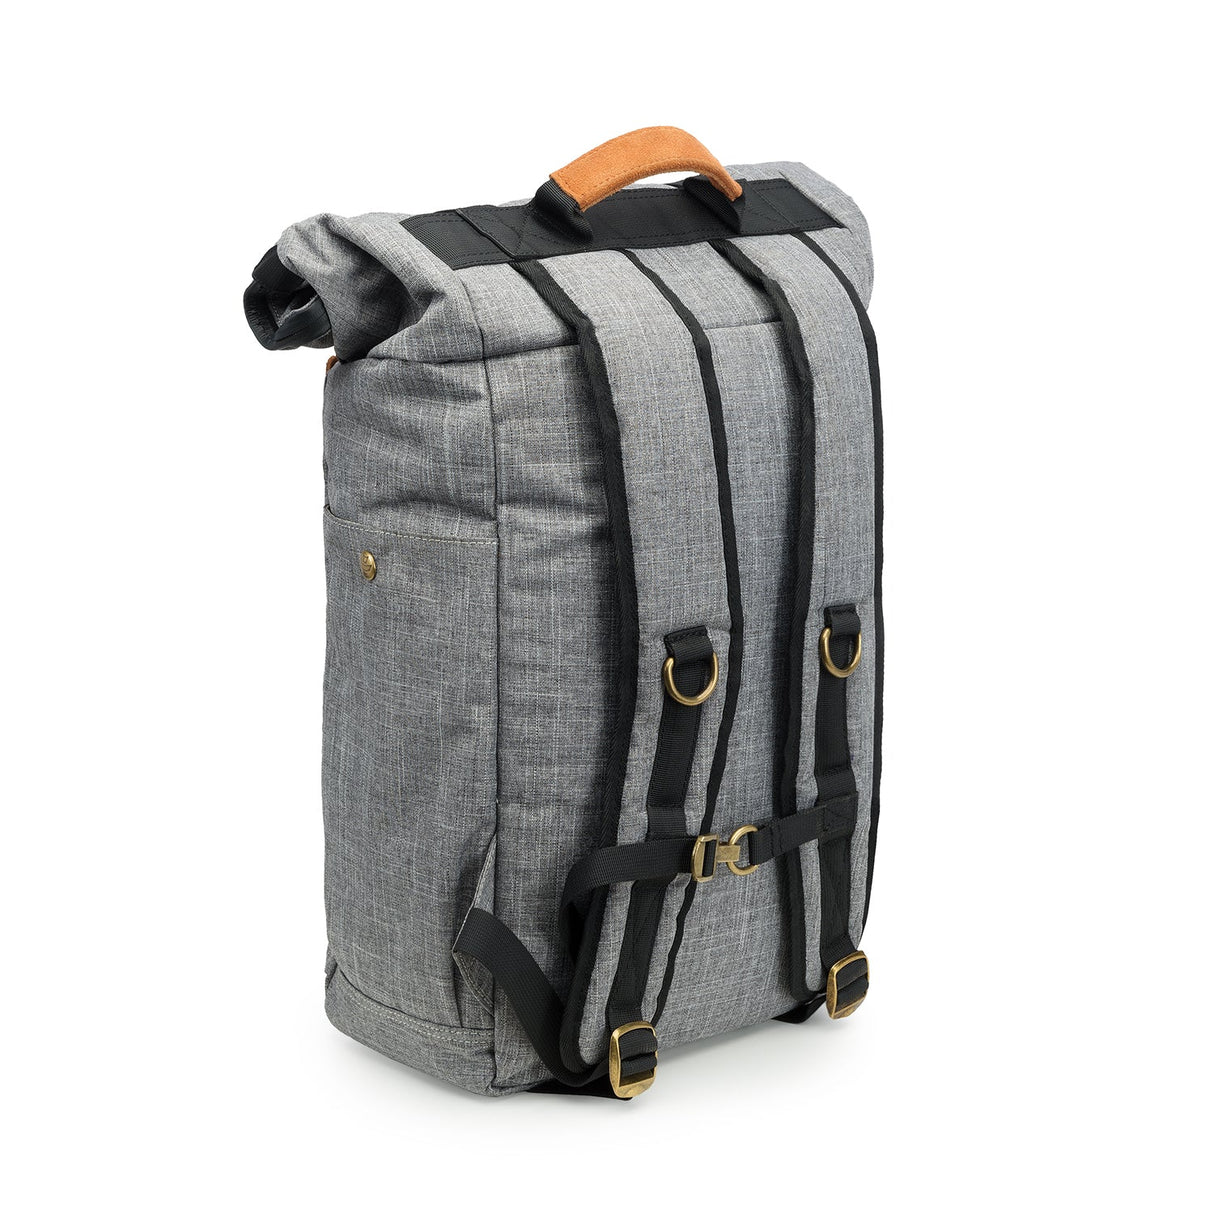 Revelry Supply The Drifter - Smell Proof Rolltop Backpack in grey, rear view with straps